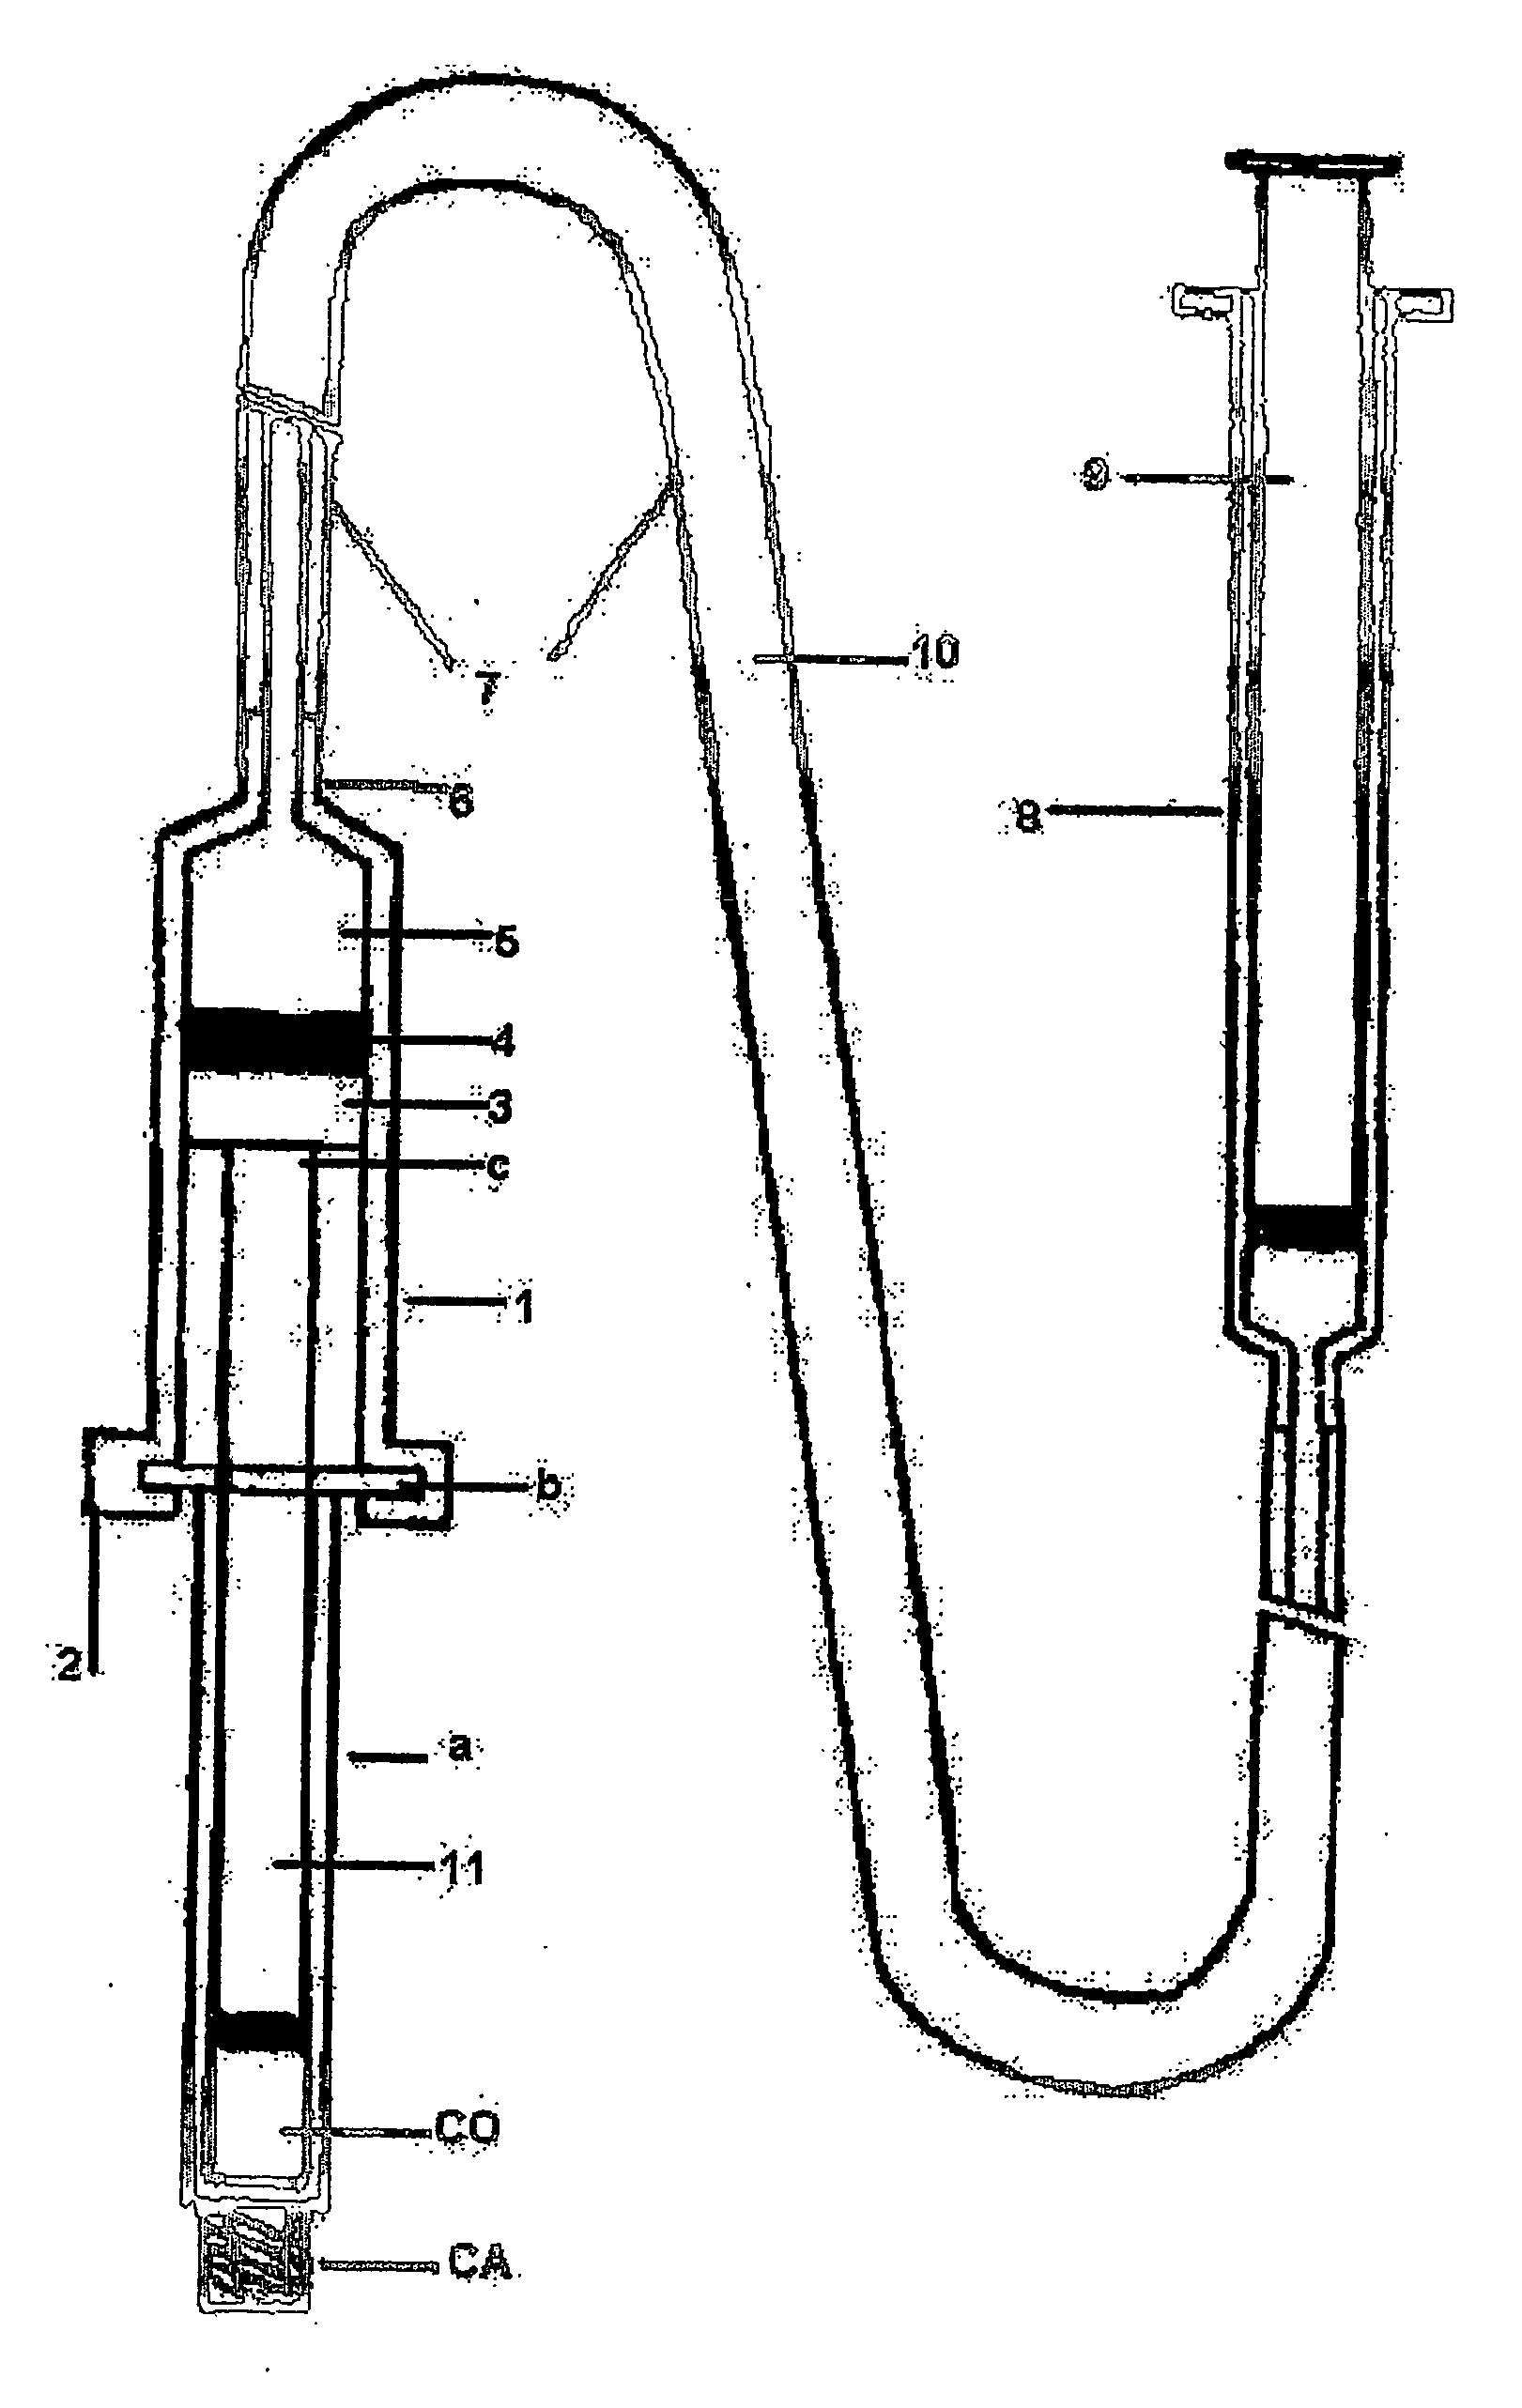 Hydraulic device for the injection of bone cement in percutaneous vertebroplasty